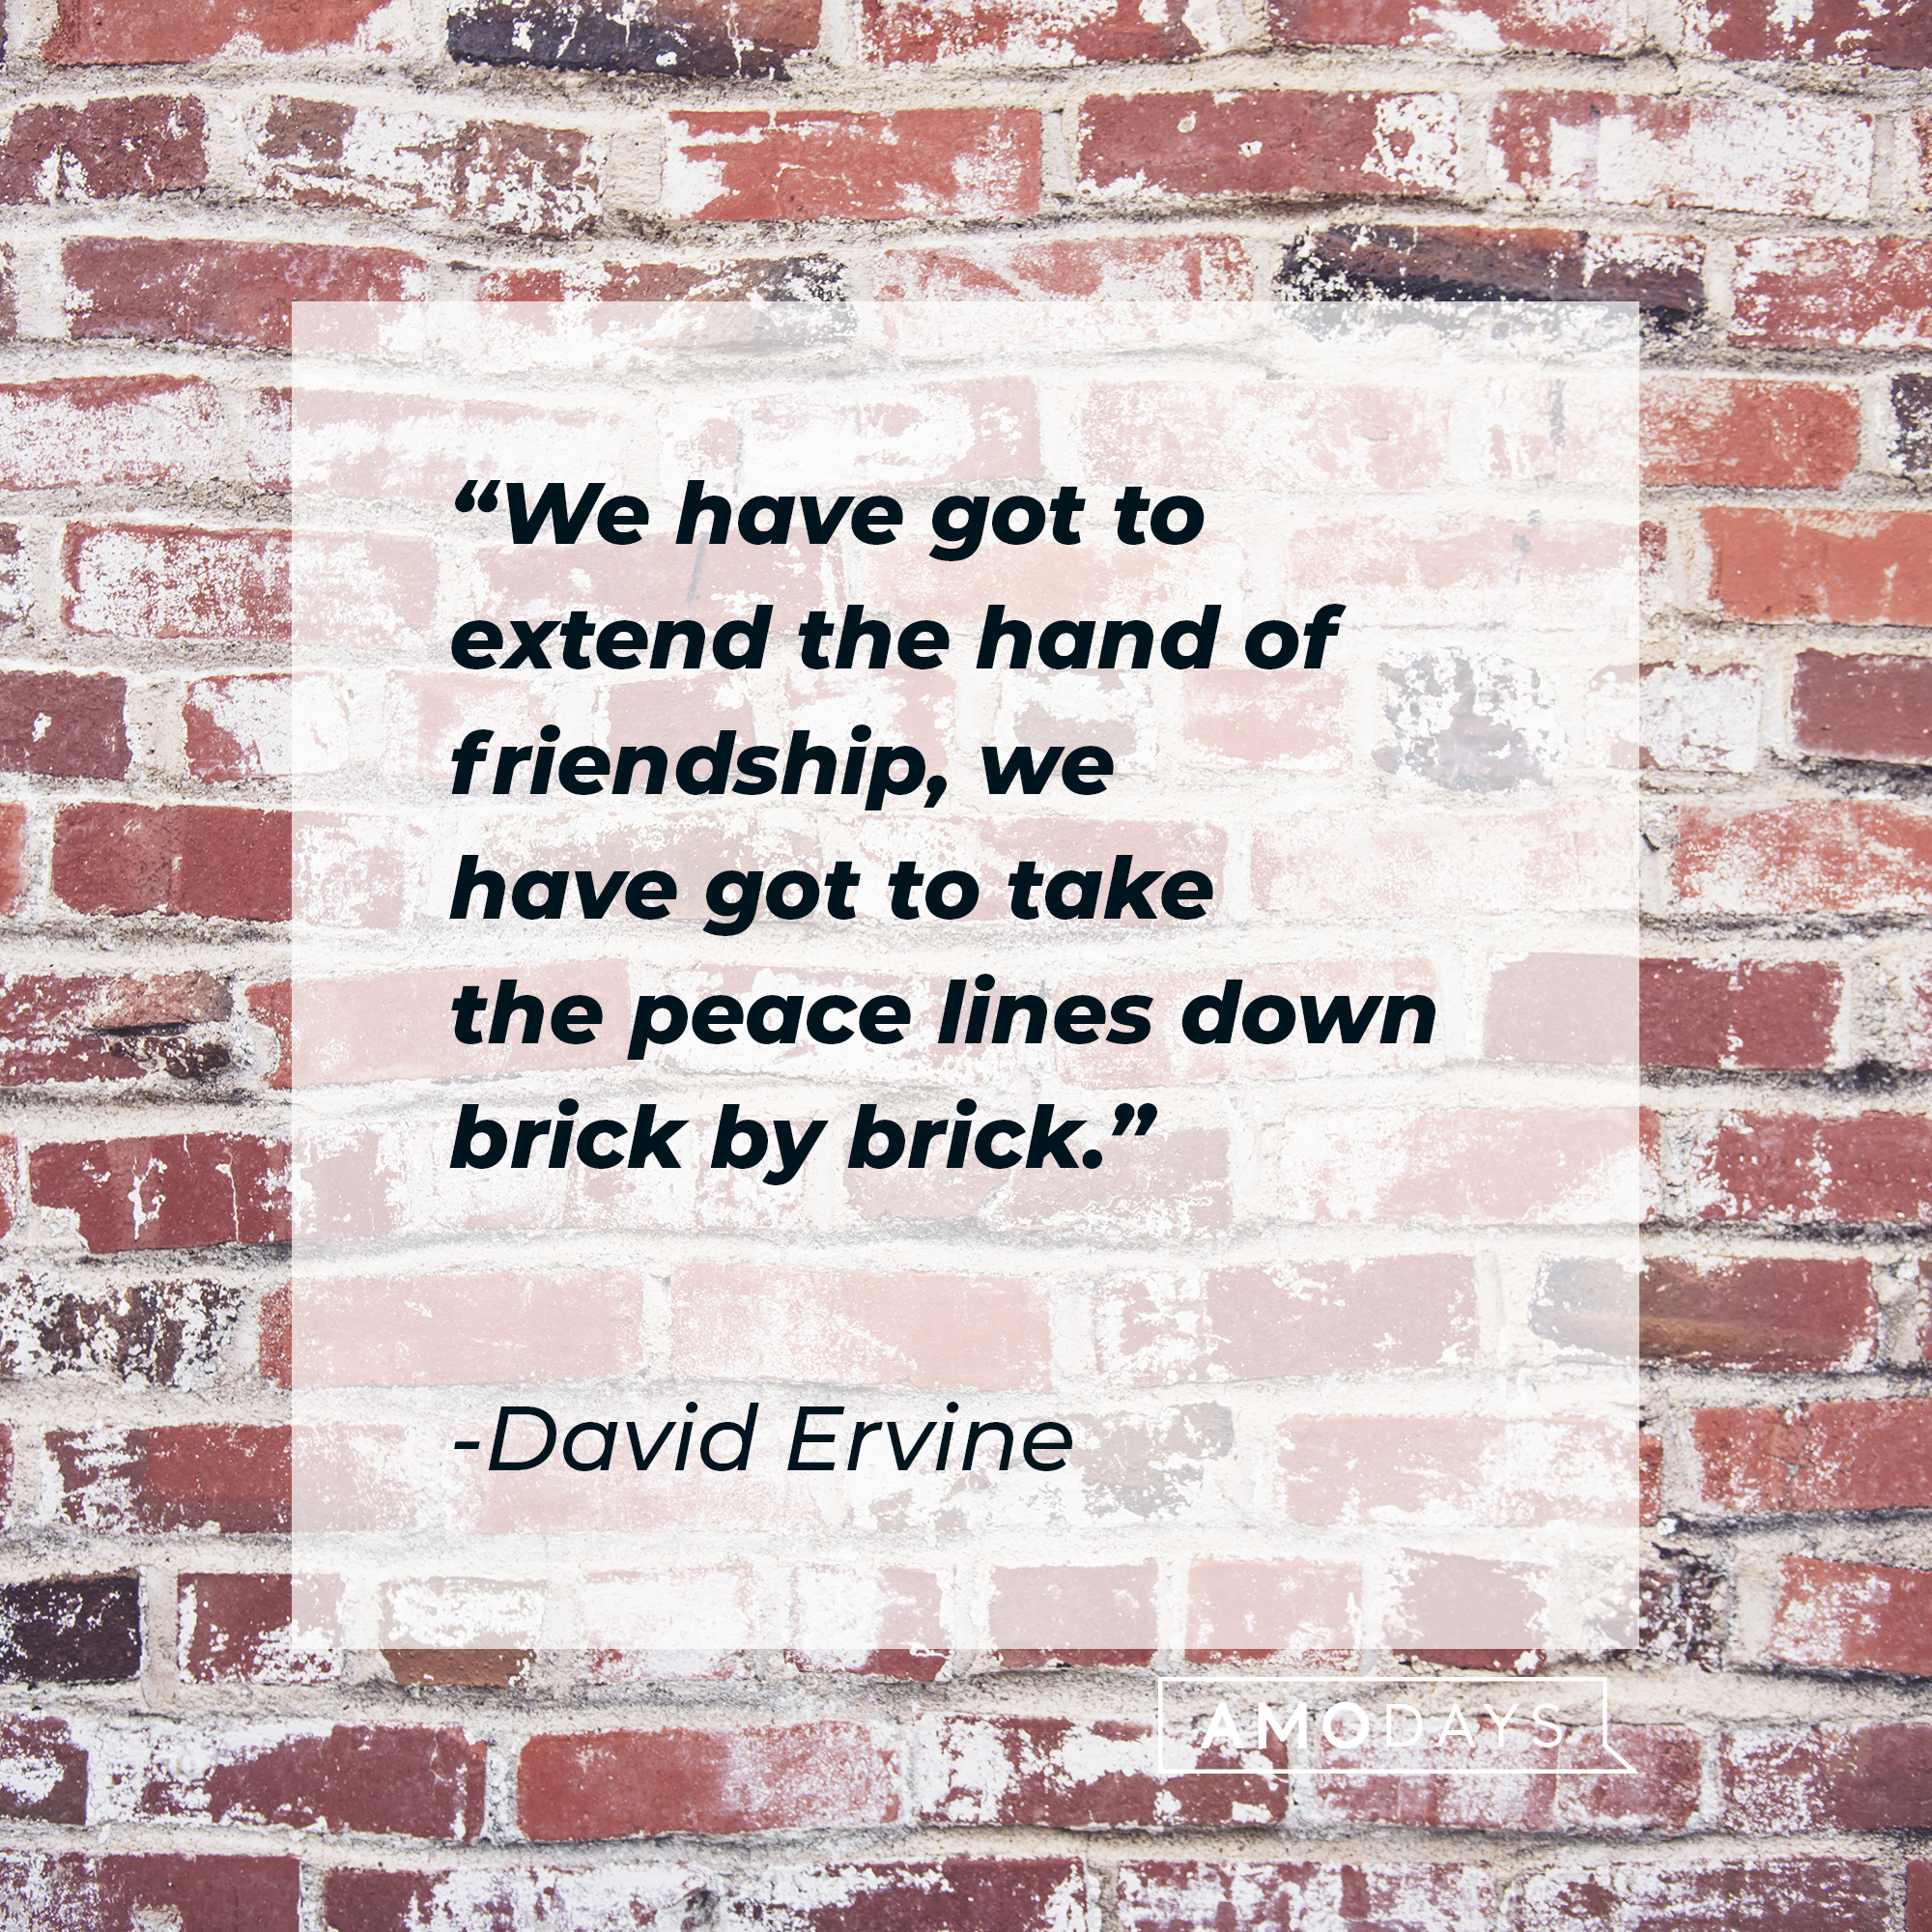 David Ervine's quote: "We have got to extend the hand of friendship, we have got to take the peace lines down brick by brick." | Source: Unsplash